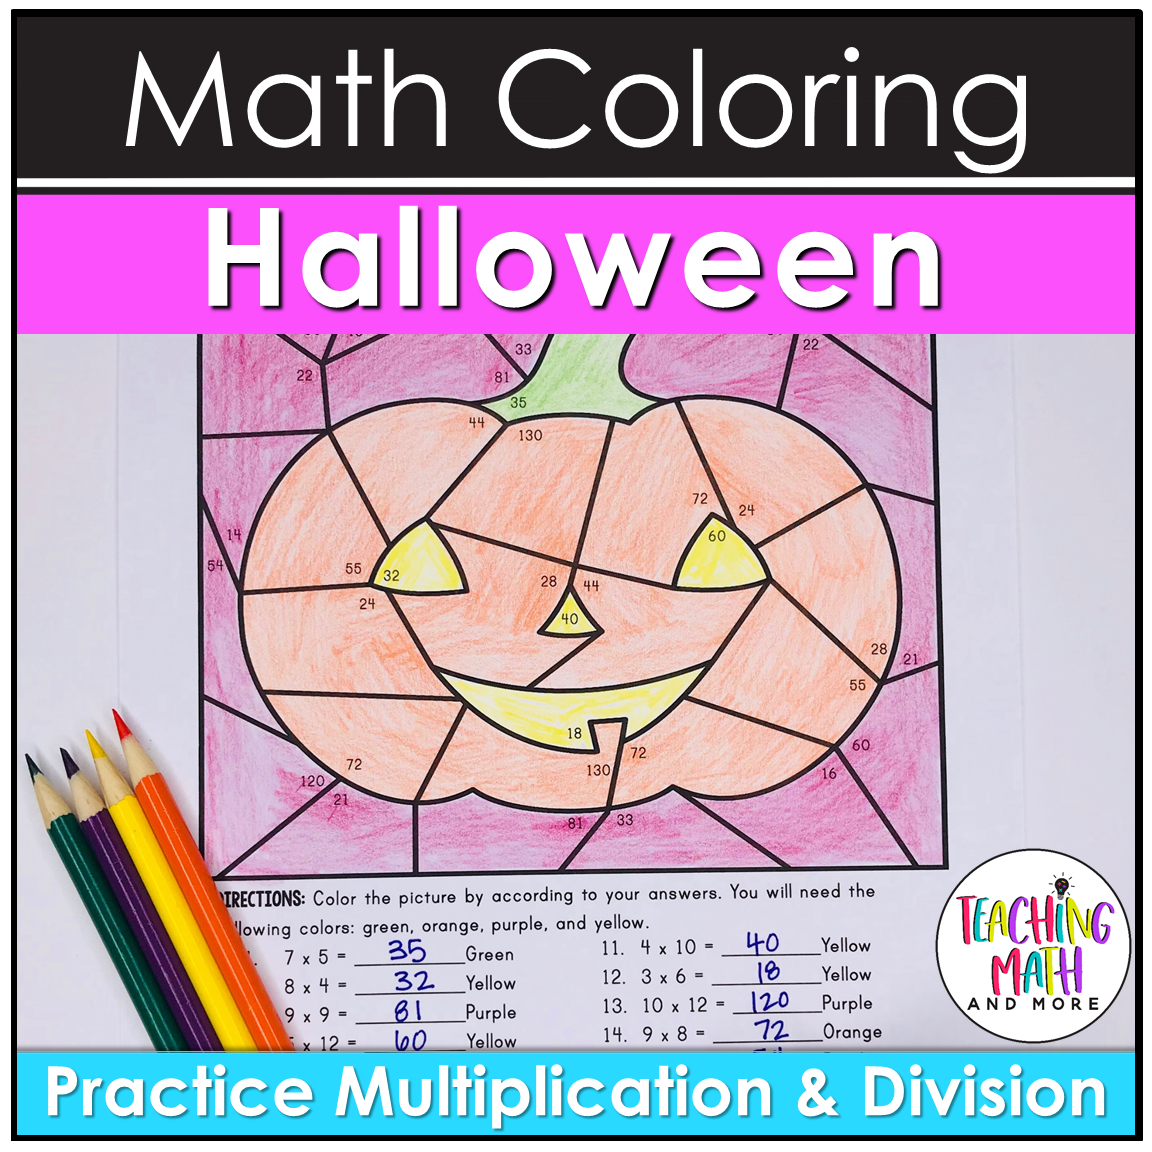 halloween-math-coloring-multiplication-division-worksheets-teaching-math-and-more